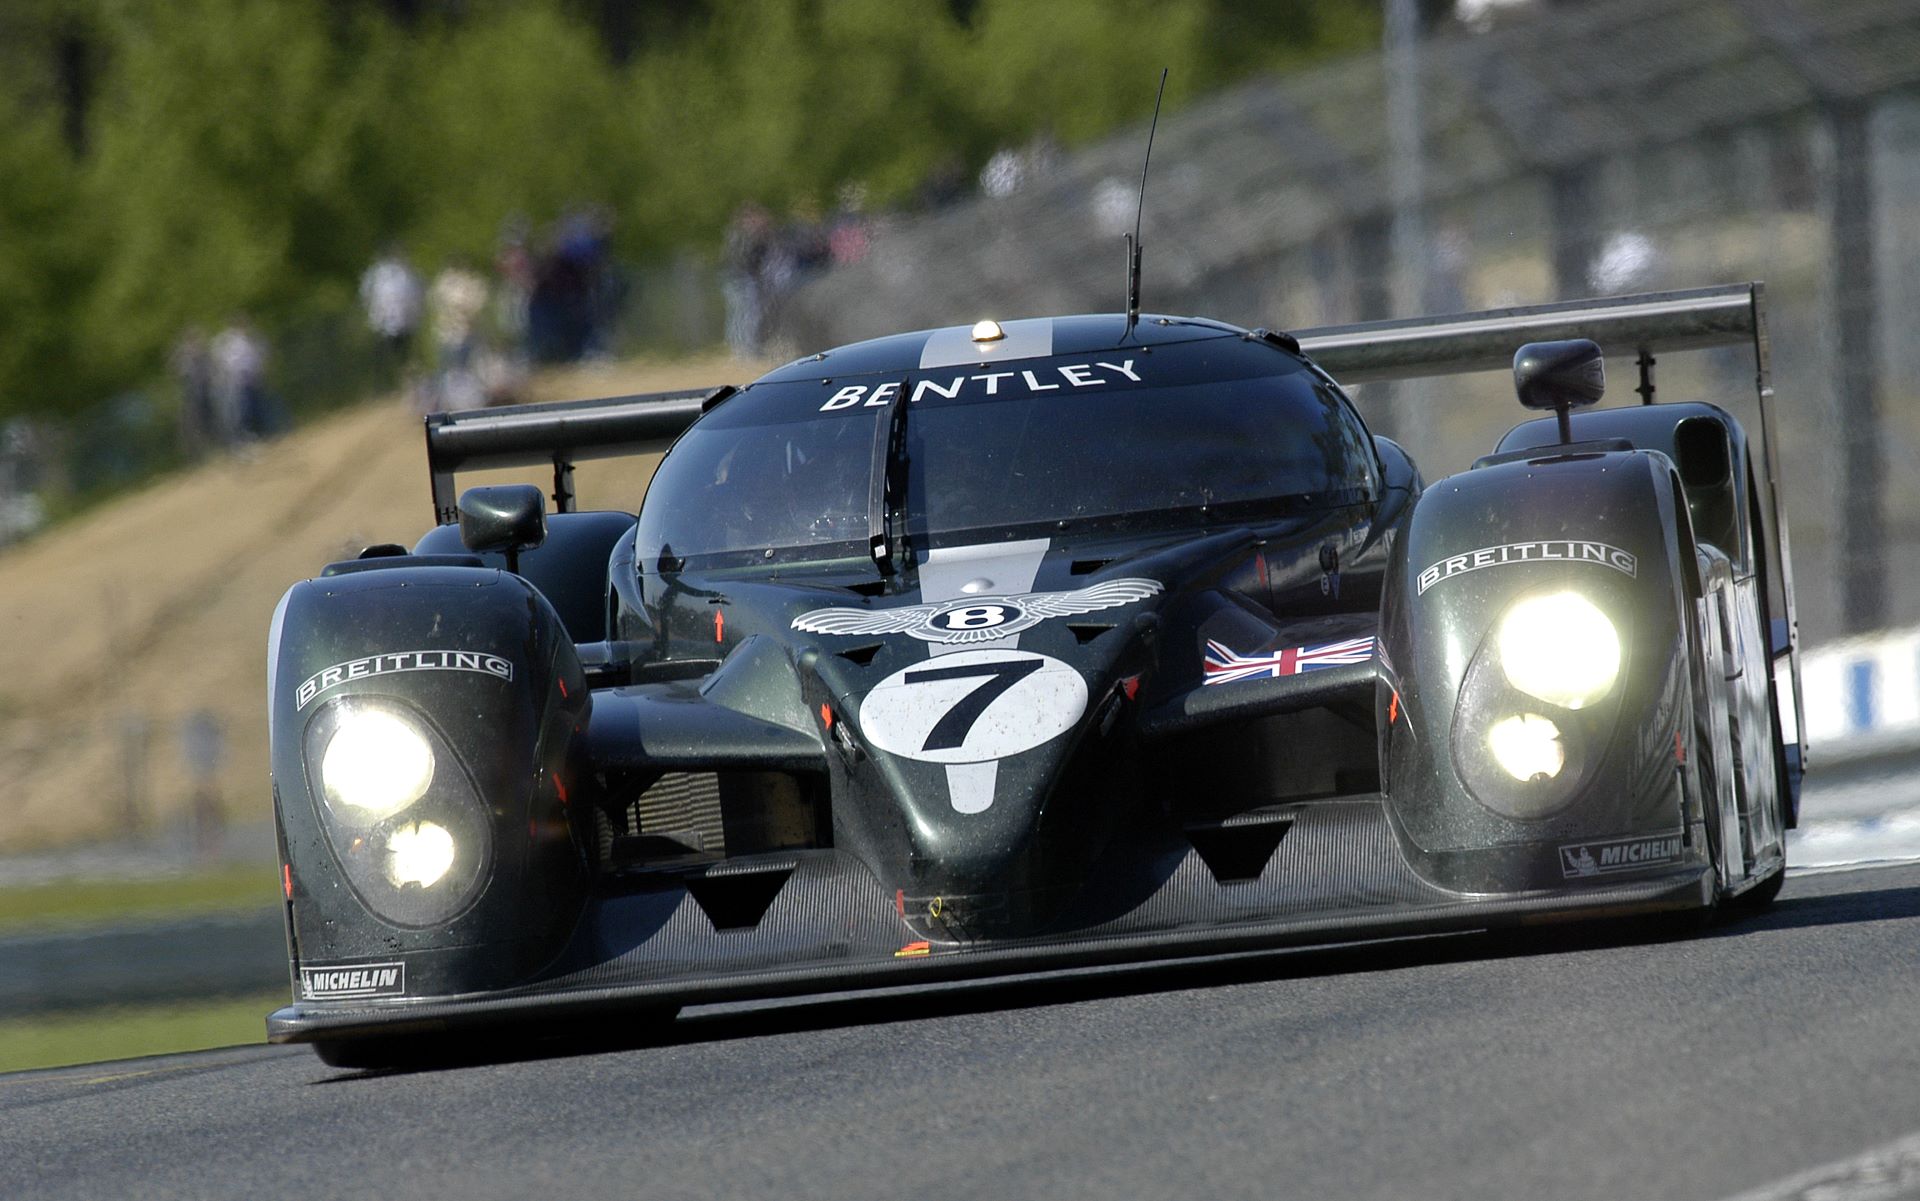 2003 Bentley Speed 8 and 2000 Bentley EXP Speed 8 prototype to take to the track as the Donington Historic Festival pays tribute to the centenary of Bentley’s first win at Le Mans